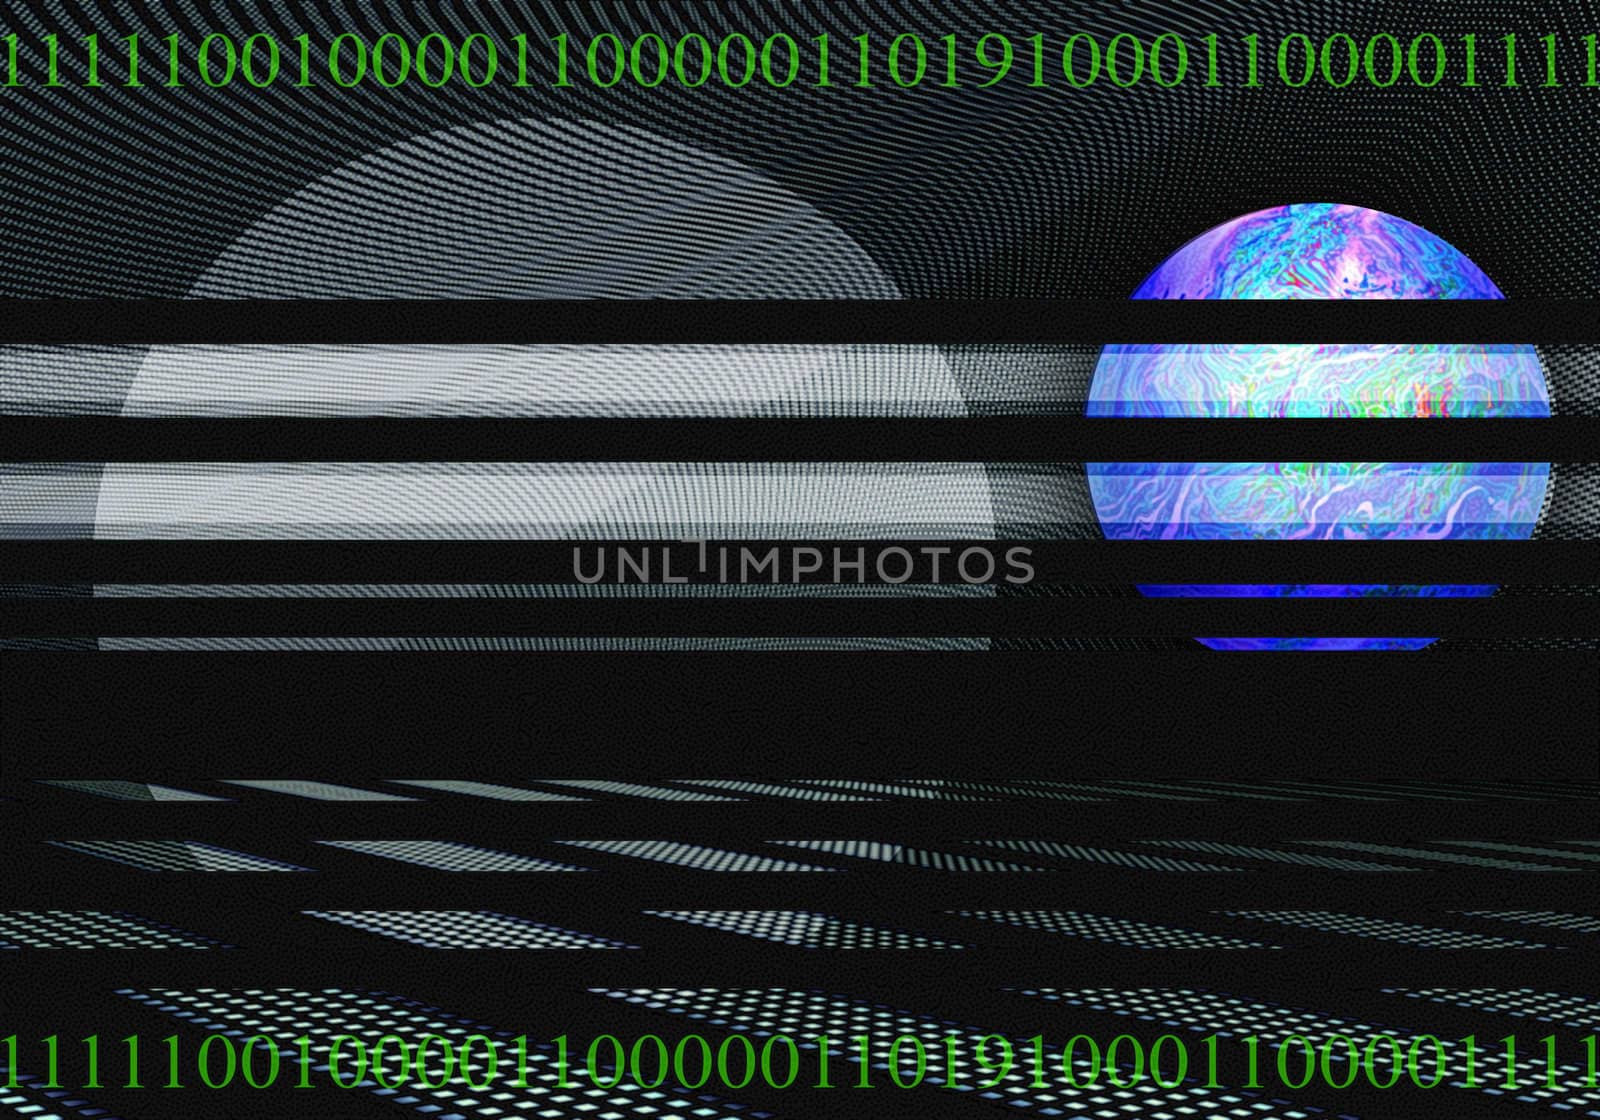 creative textured abstract symbolic computer background image